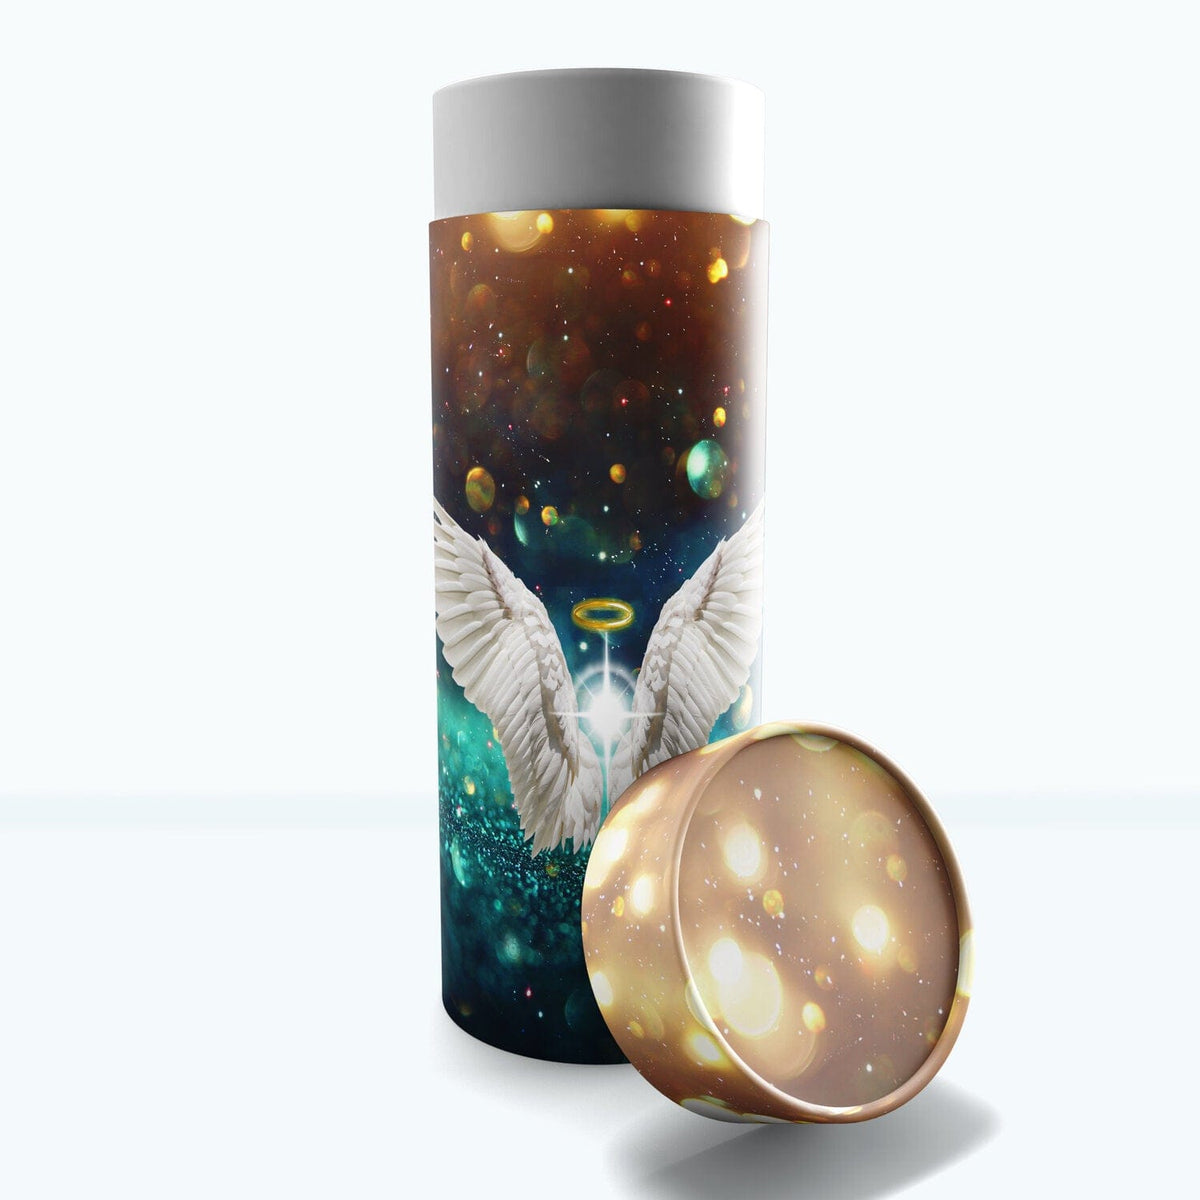 Commemorative Cremation Urns Small Guardian Angel (Teal) - Biodegradable &amp; Eco Friendly Burial or Scattering Urn / Tube